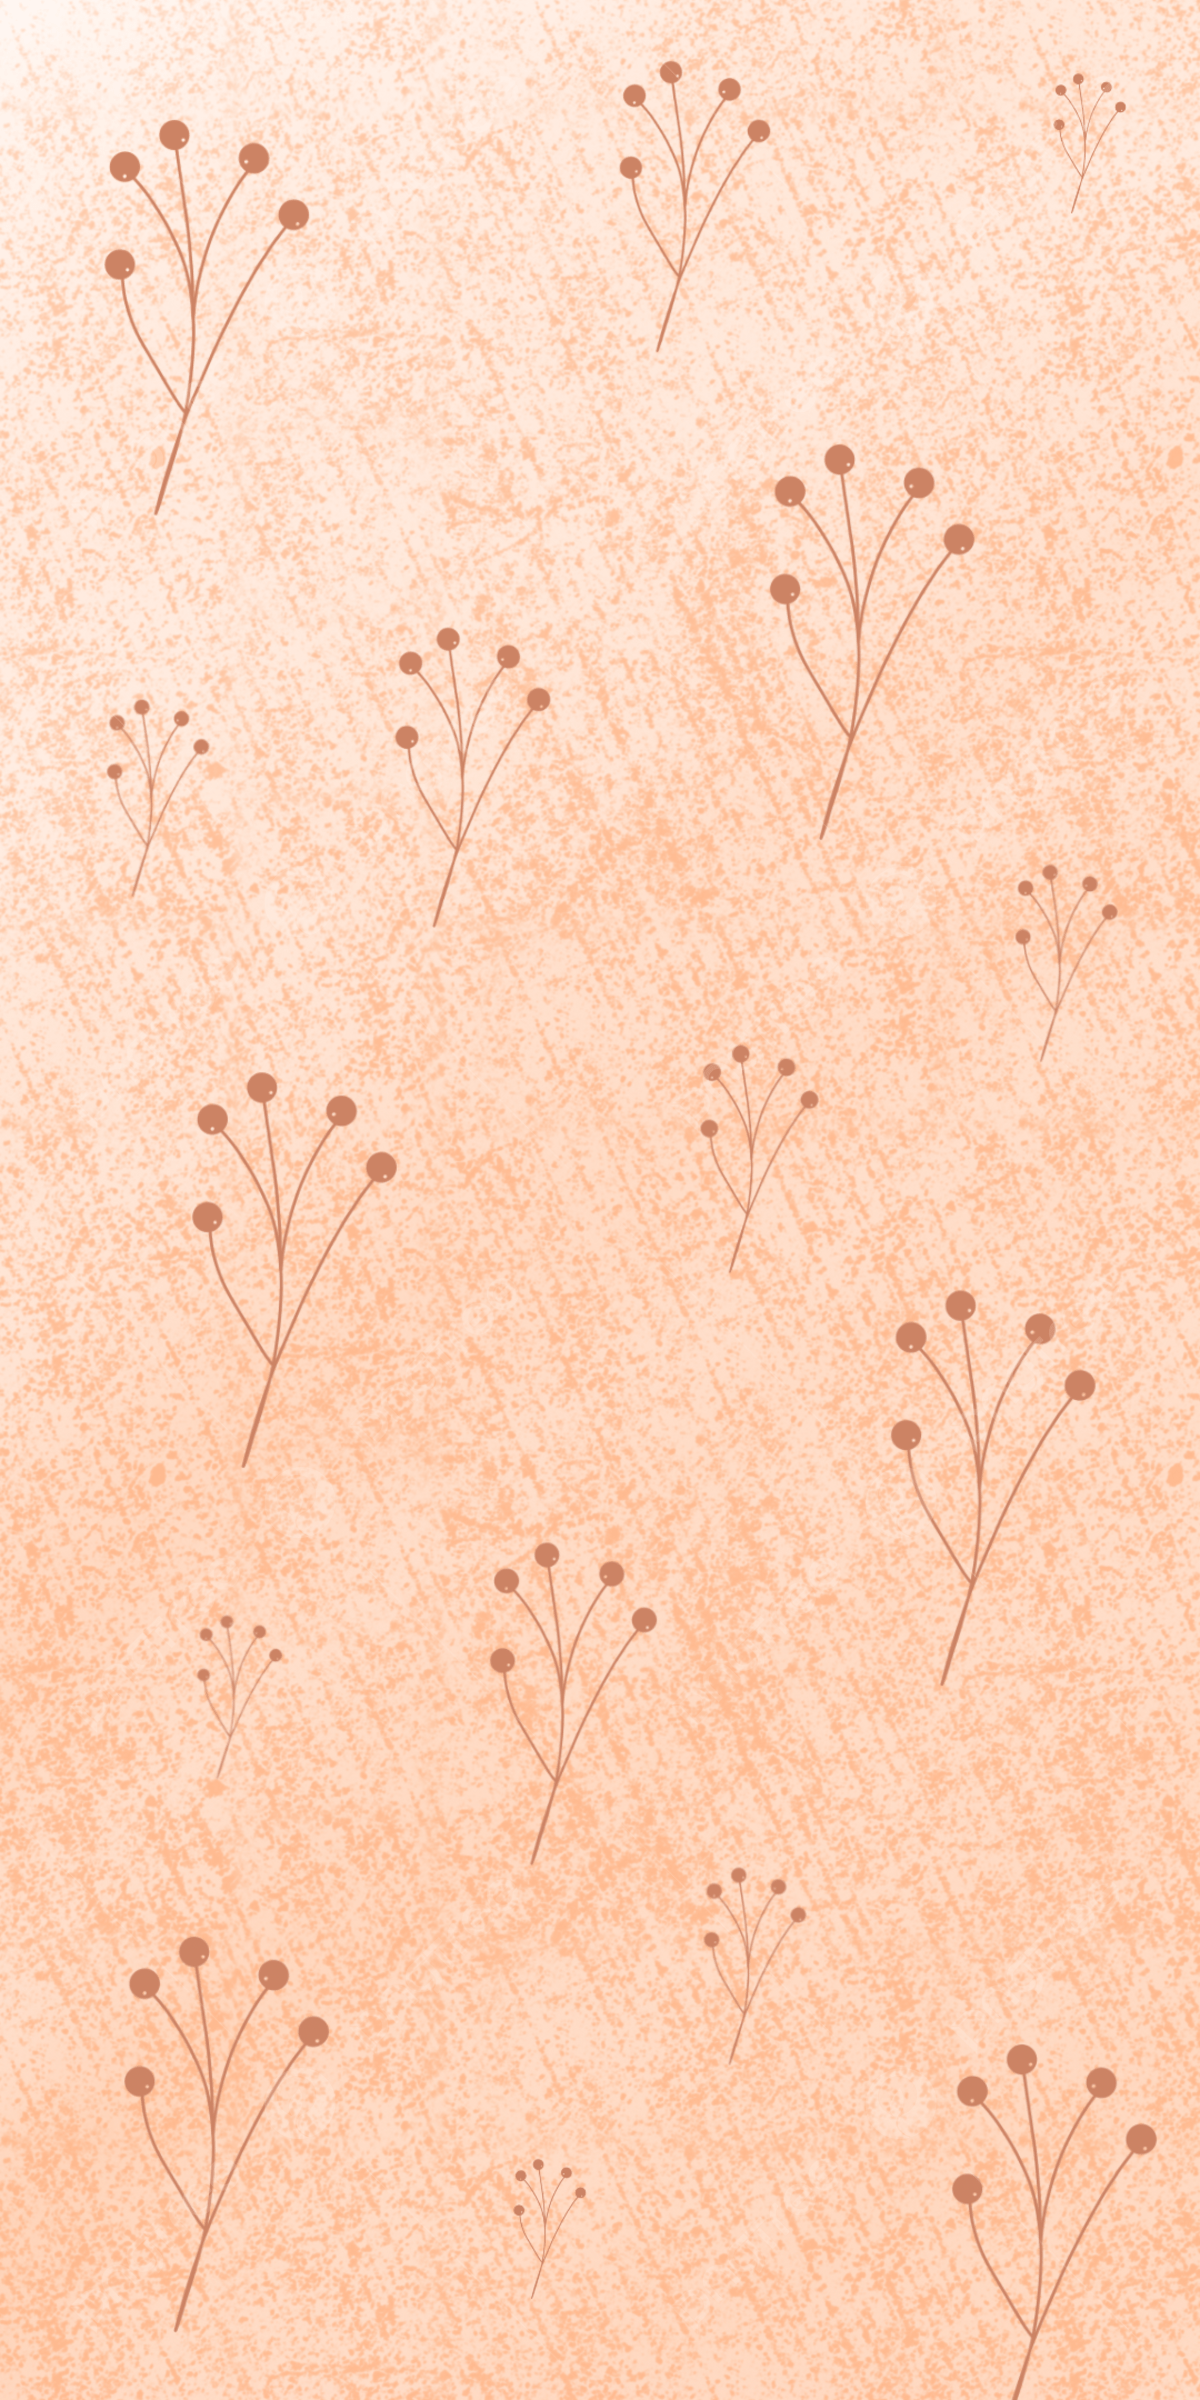 Simple Wallpaper Foliage Kawaii Background Wallpaper Image For Free Download